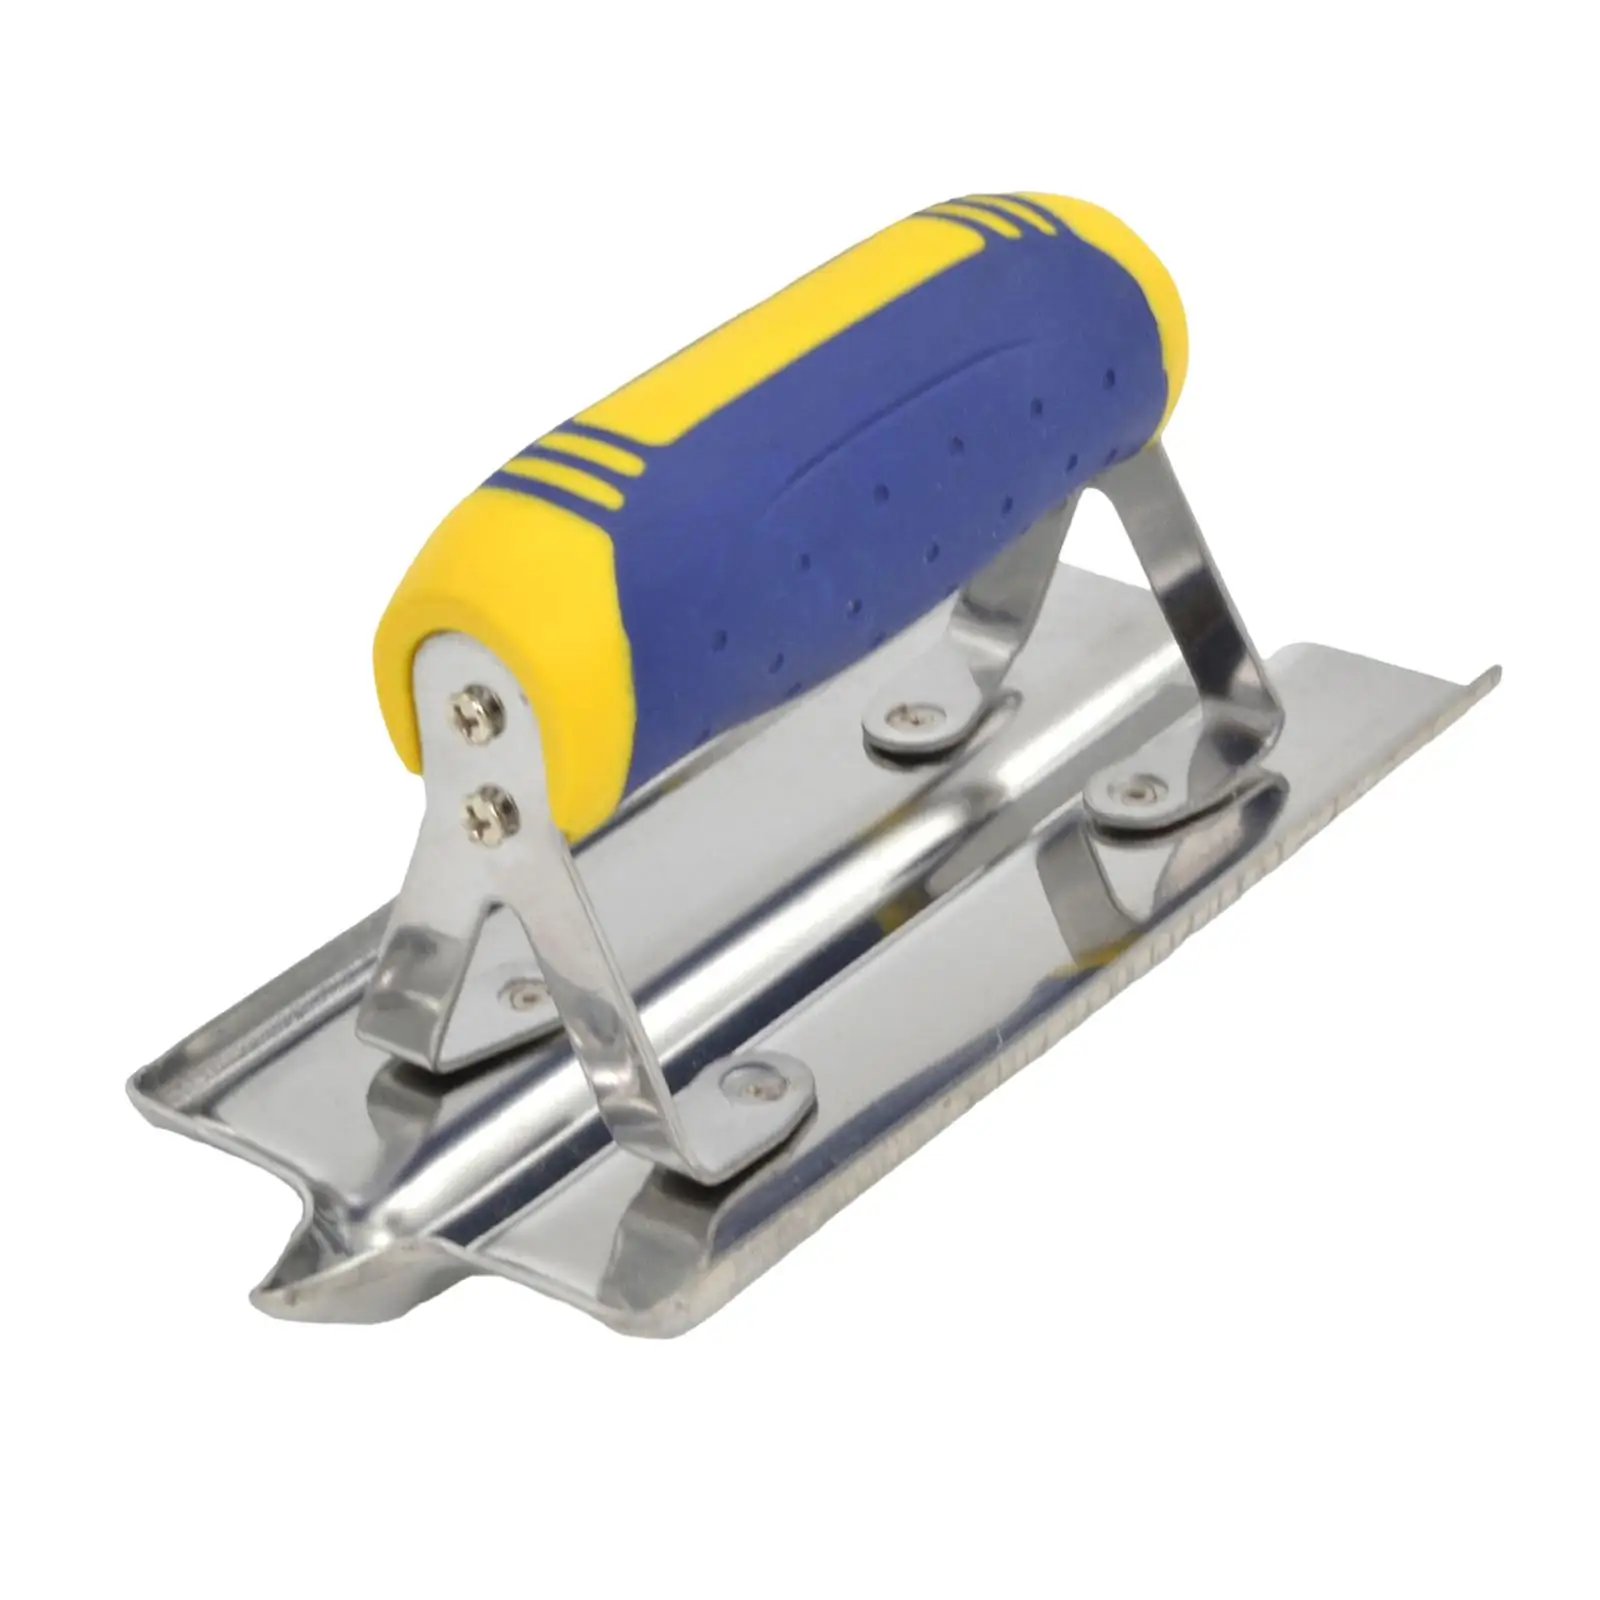 Corner Trowel Stainless Steel  for Mudding Drywall